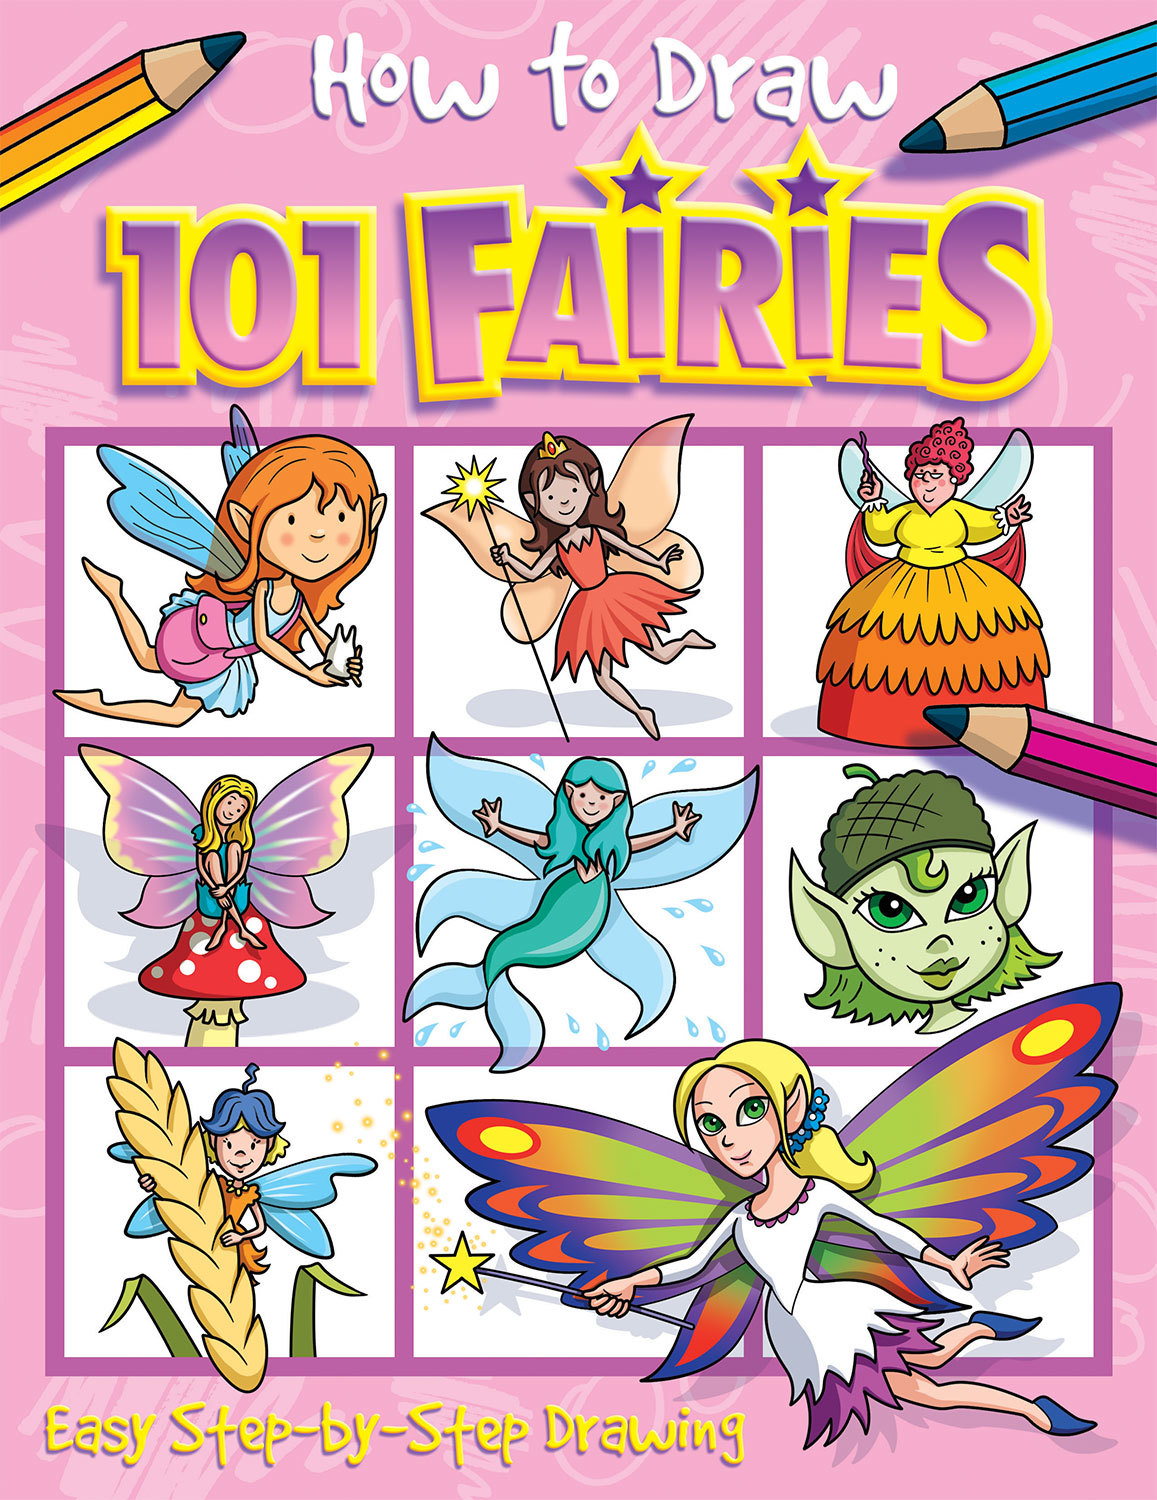 HOW TO DRAW 101 FAIRIES